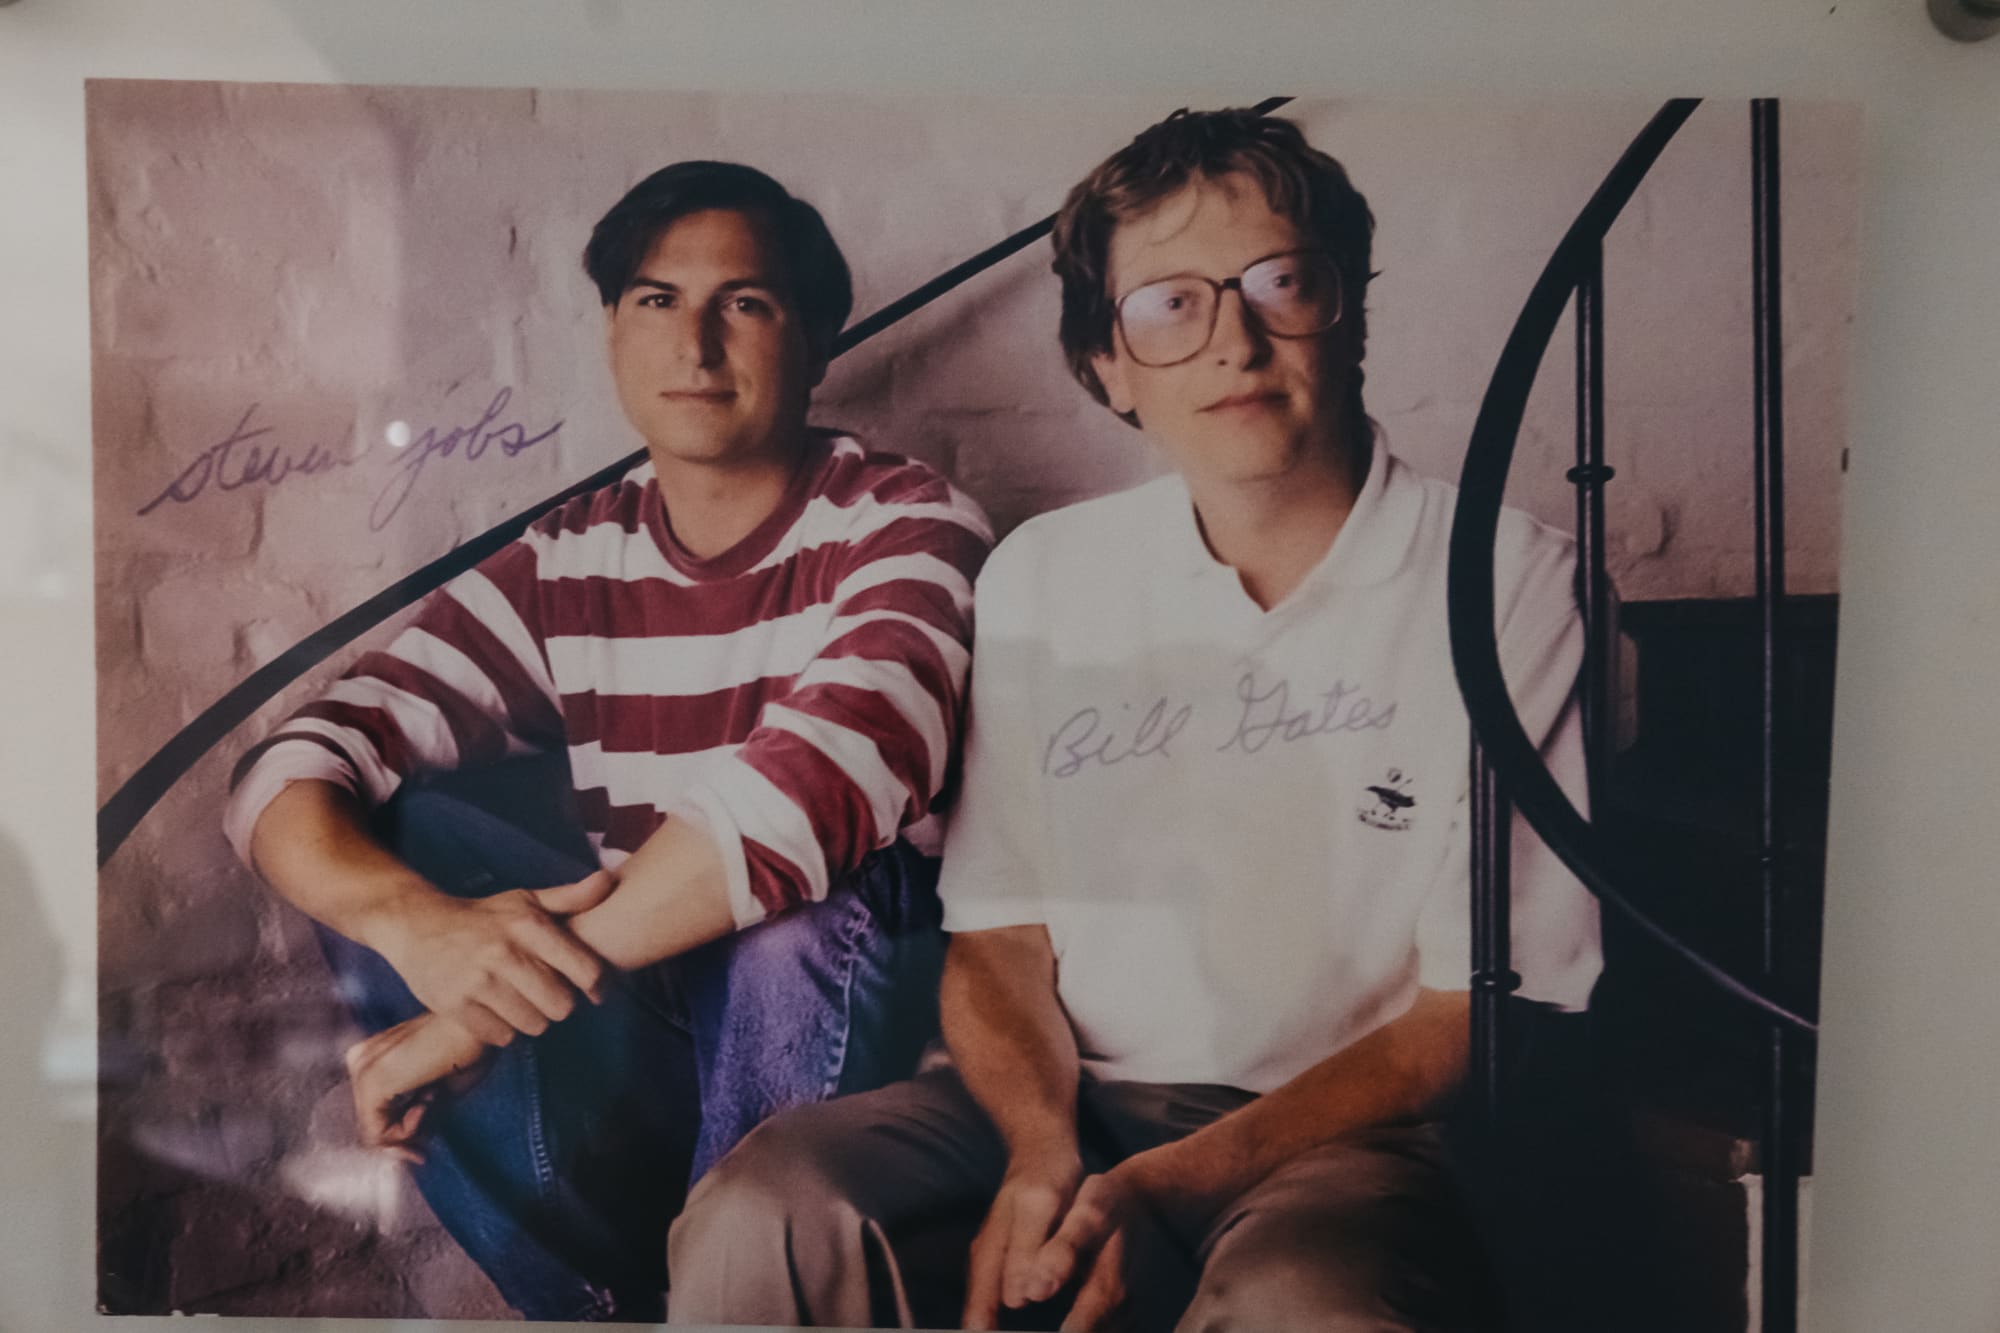 Why was Bill Gates successful? - A picture of Bill Gates and Steve Jobs